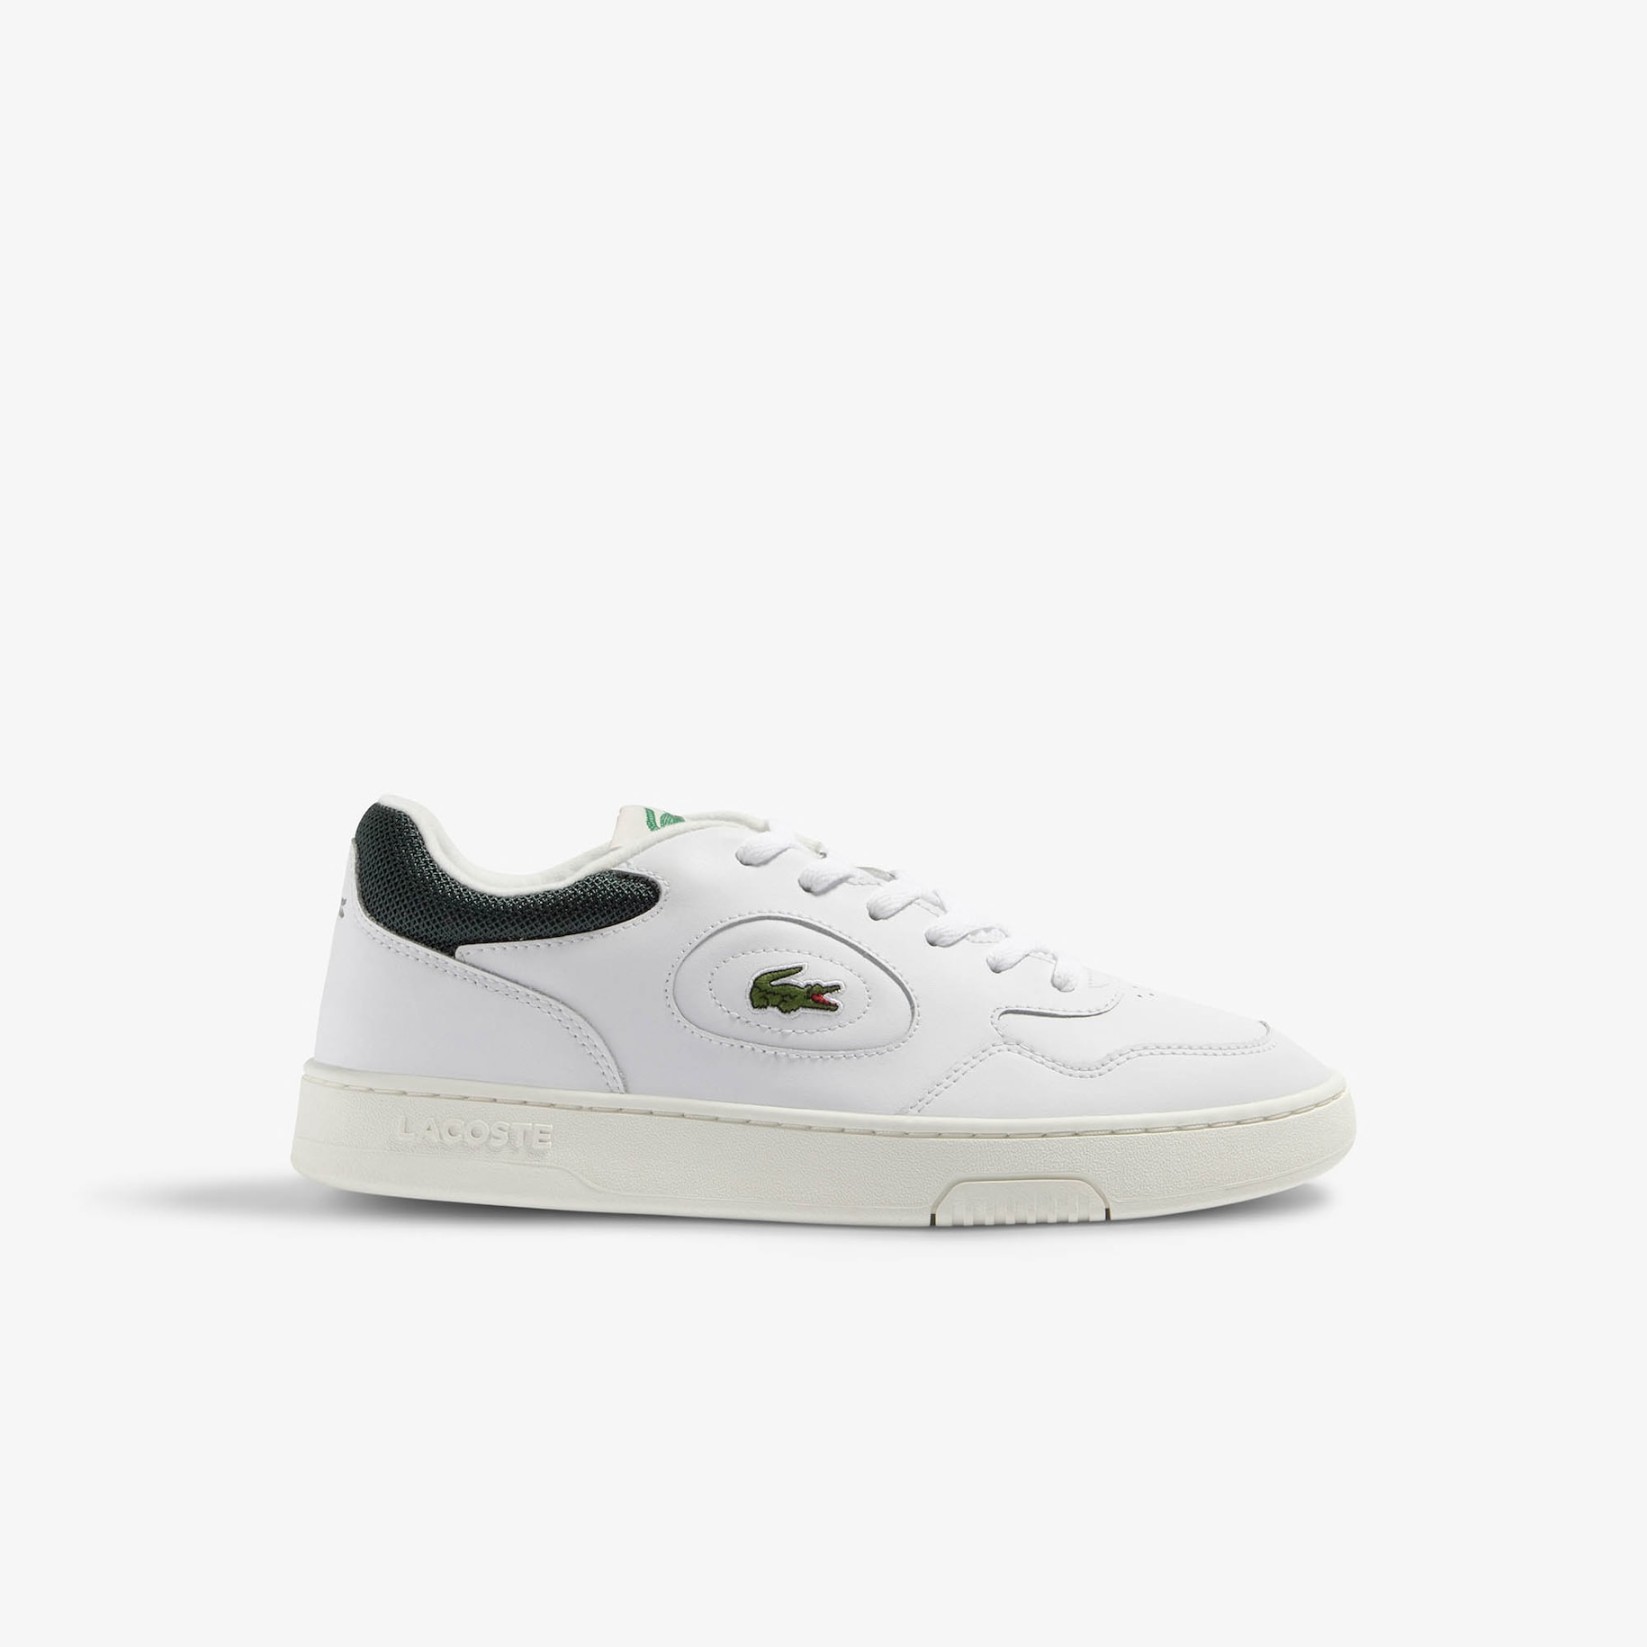 DEPORTIVO MENS LACOSTE LINESET LEATHER SNEAKERS WHITE / DARK GREEN